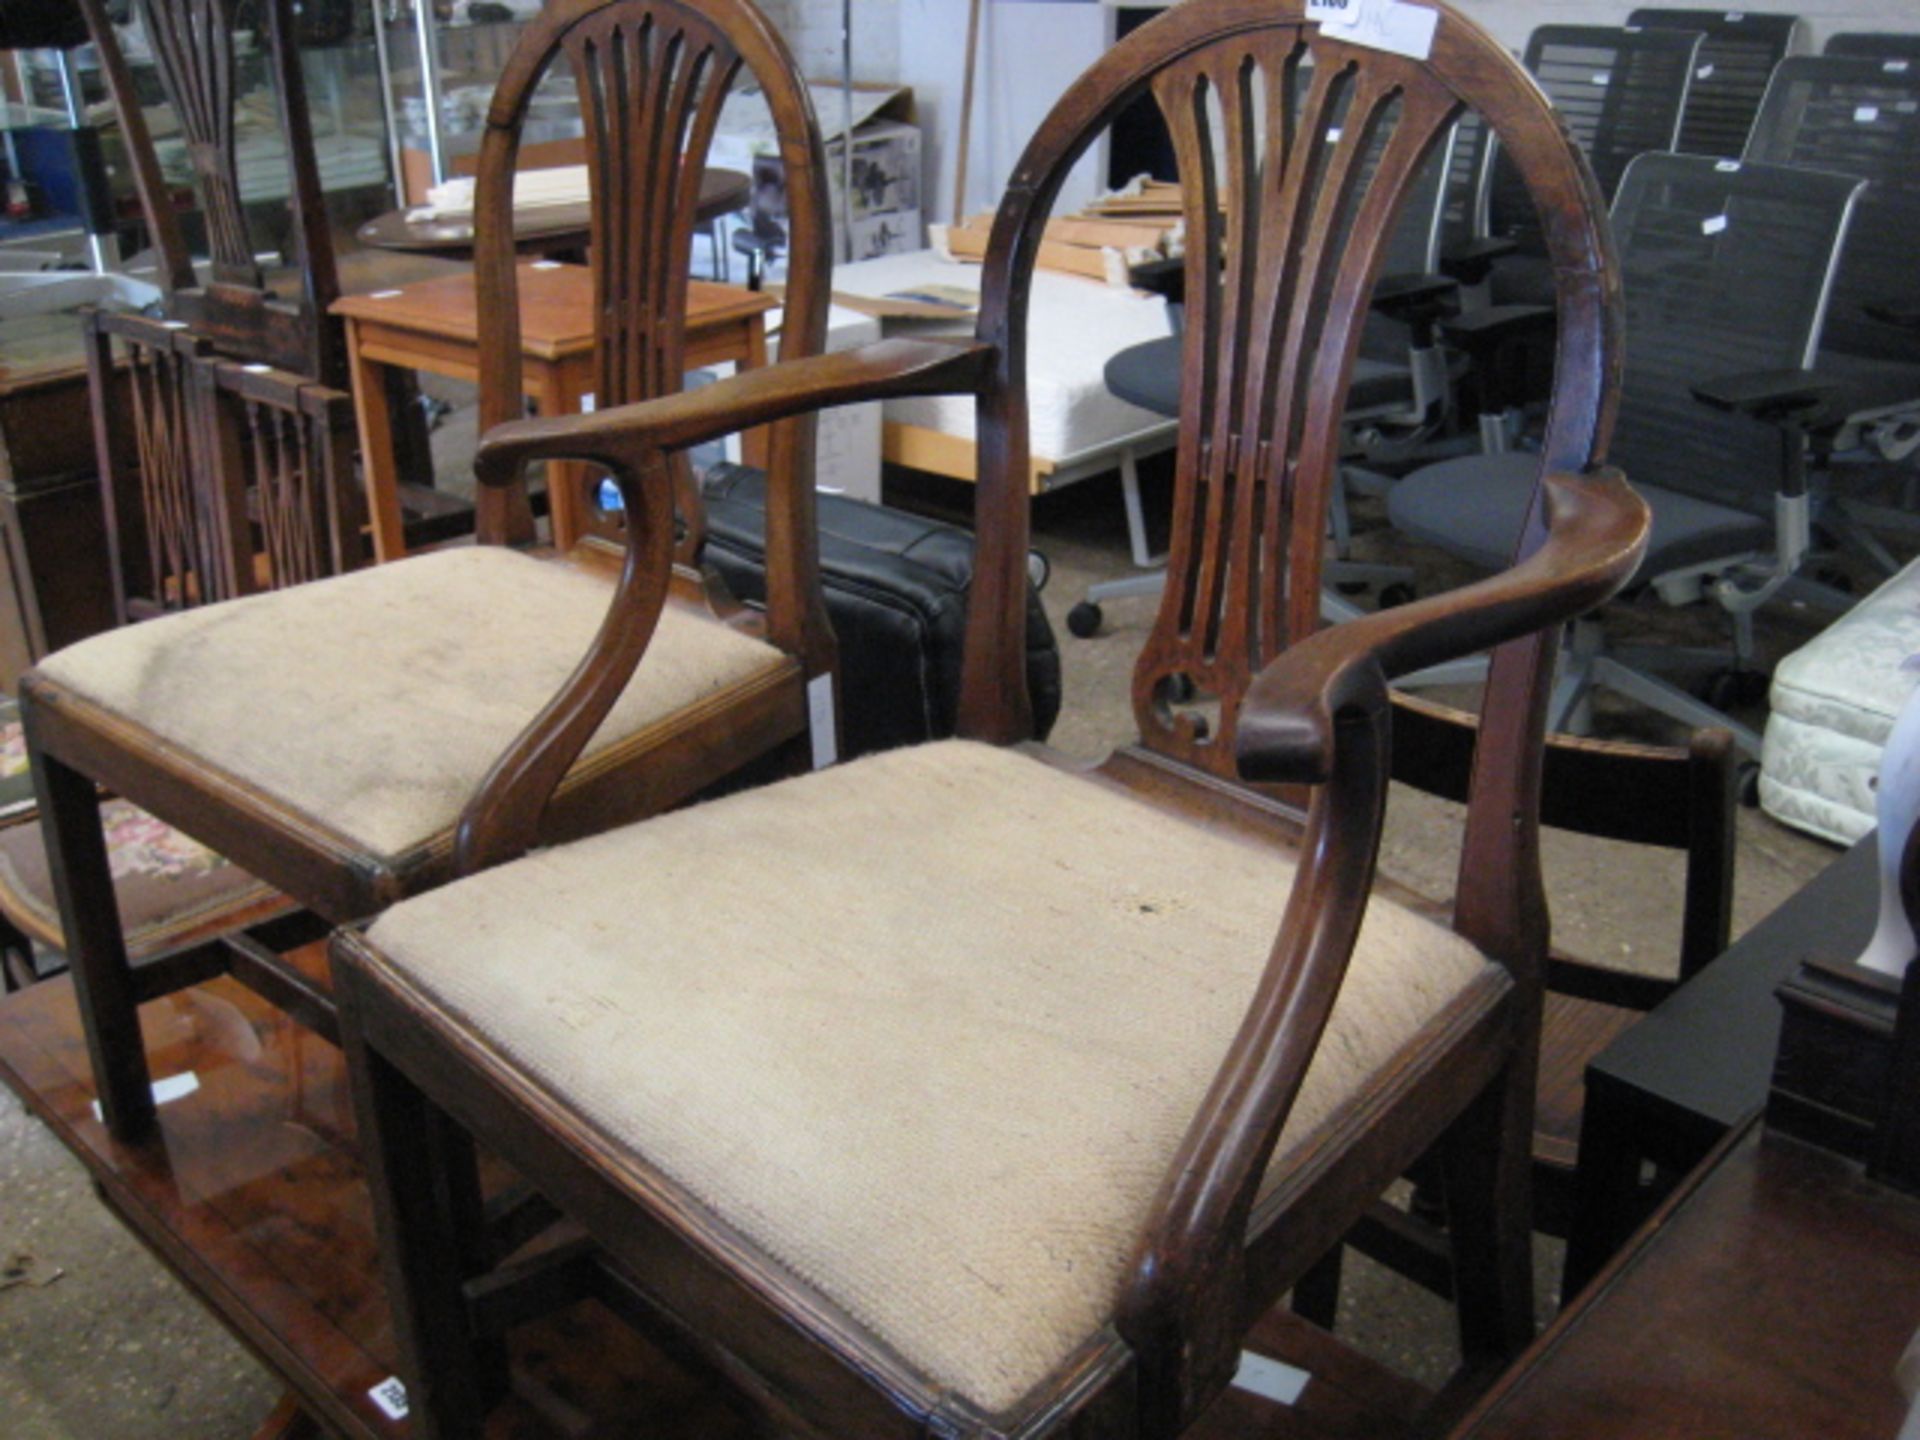 2 fiddle back chairs